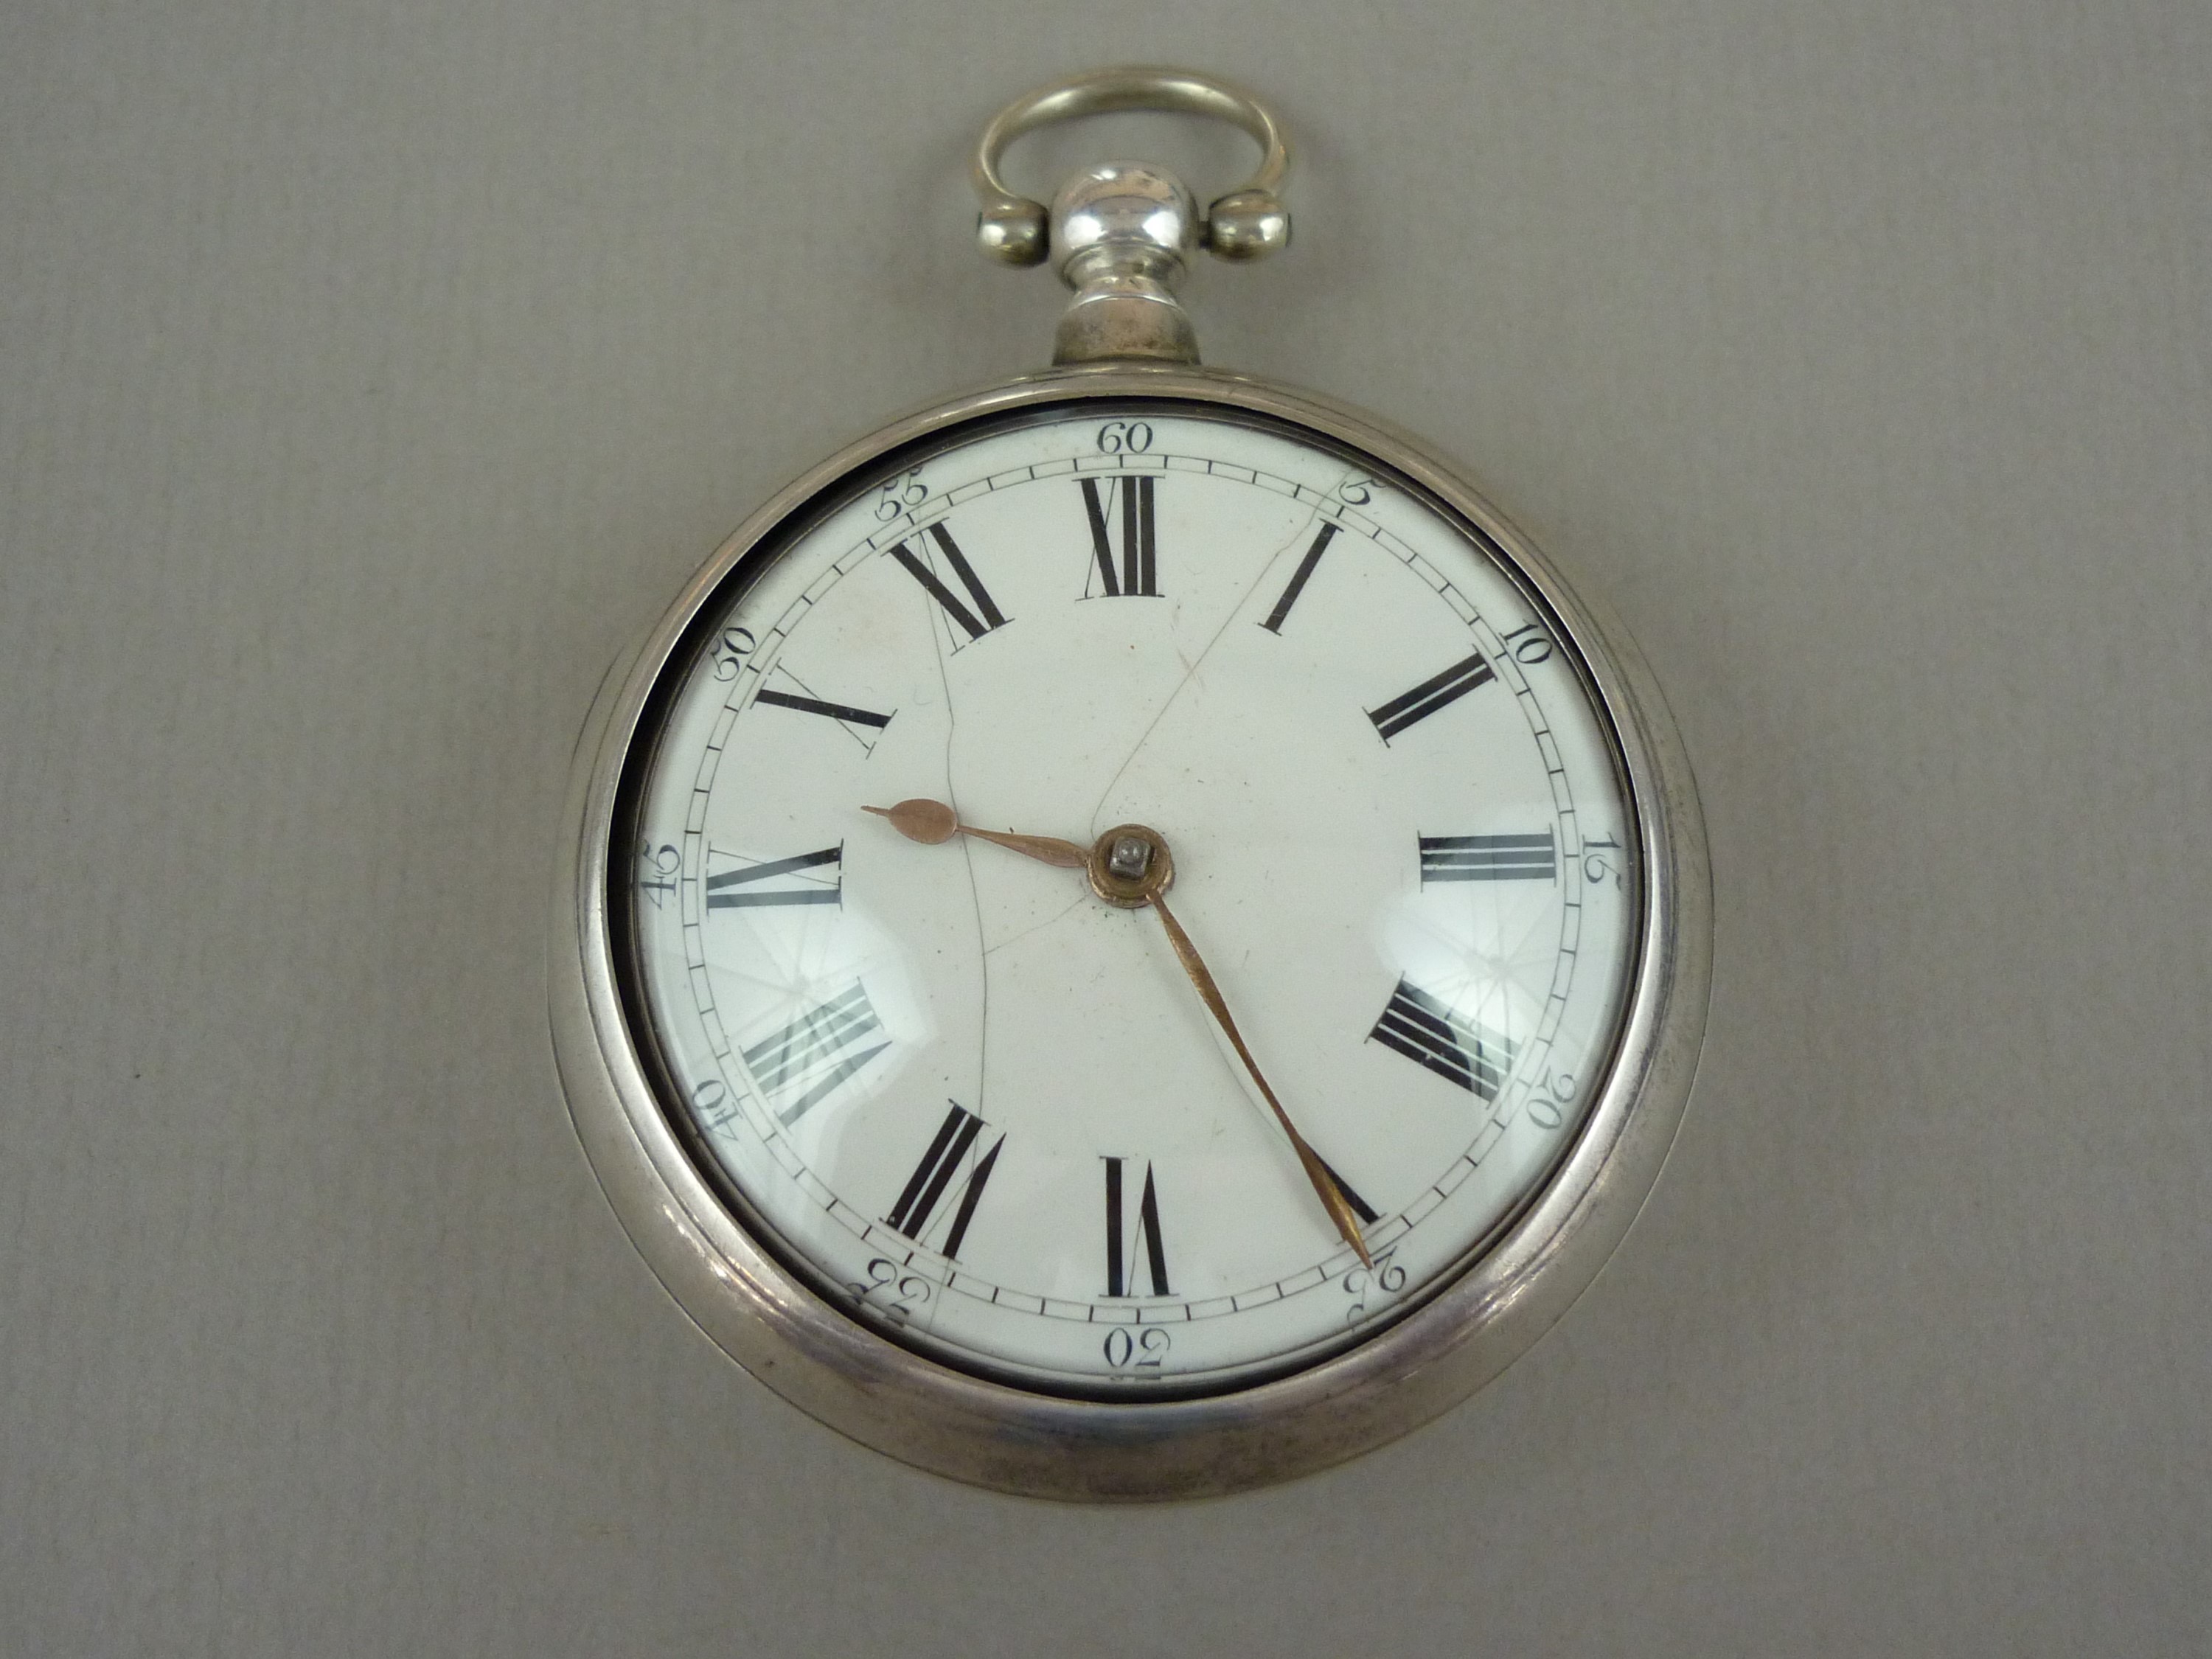 A George III silver pair cased pocket watch by D Maston of London, having verge movement, white